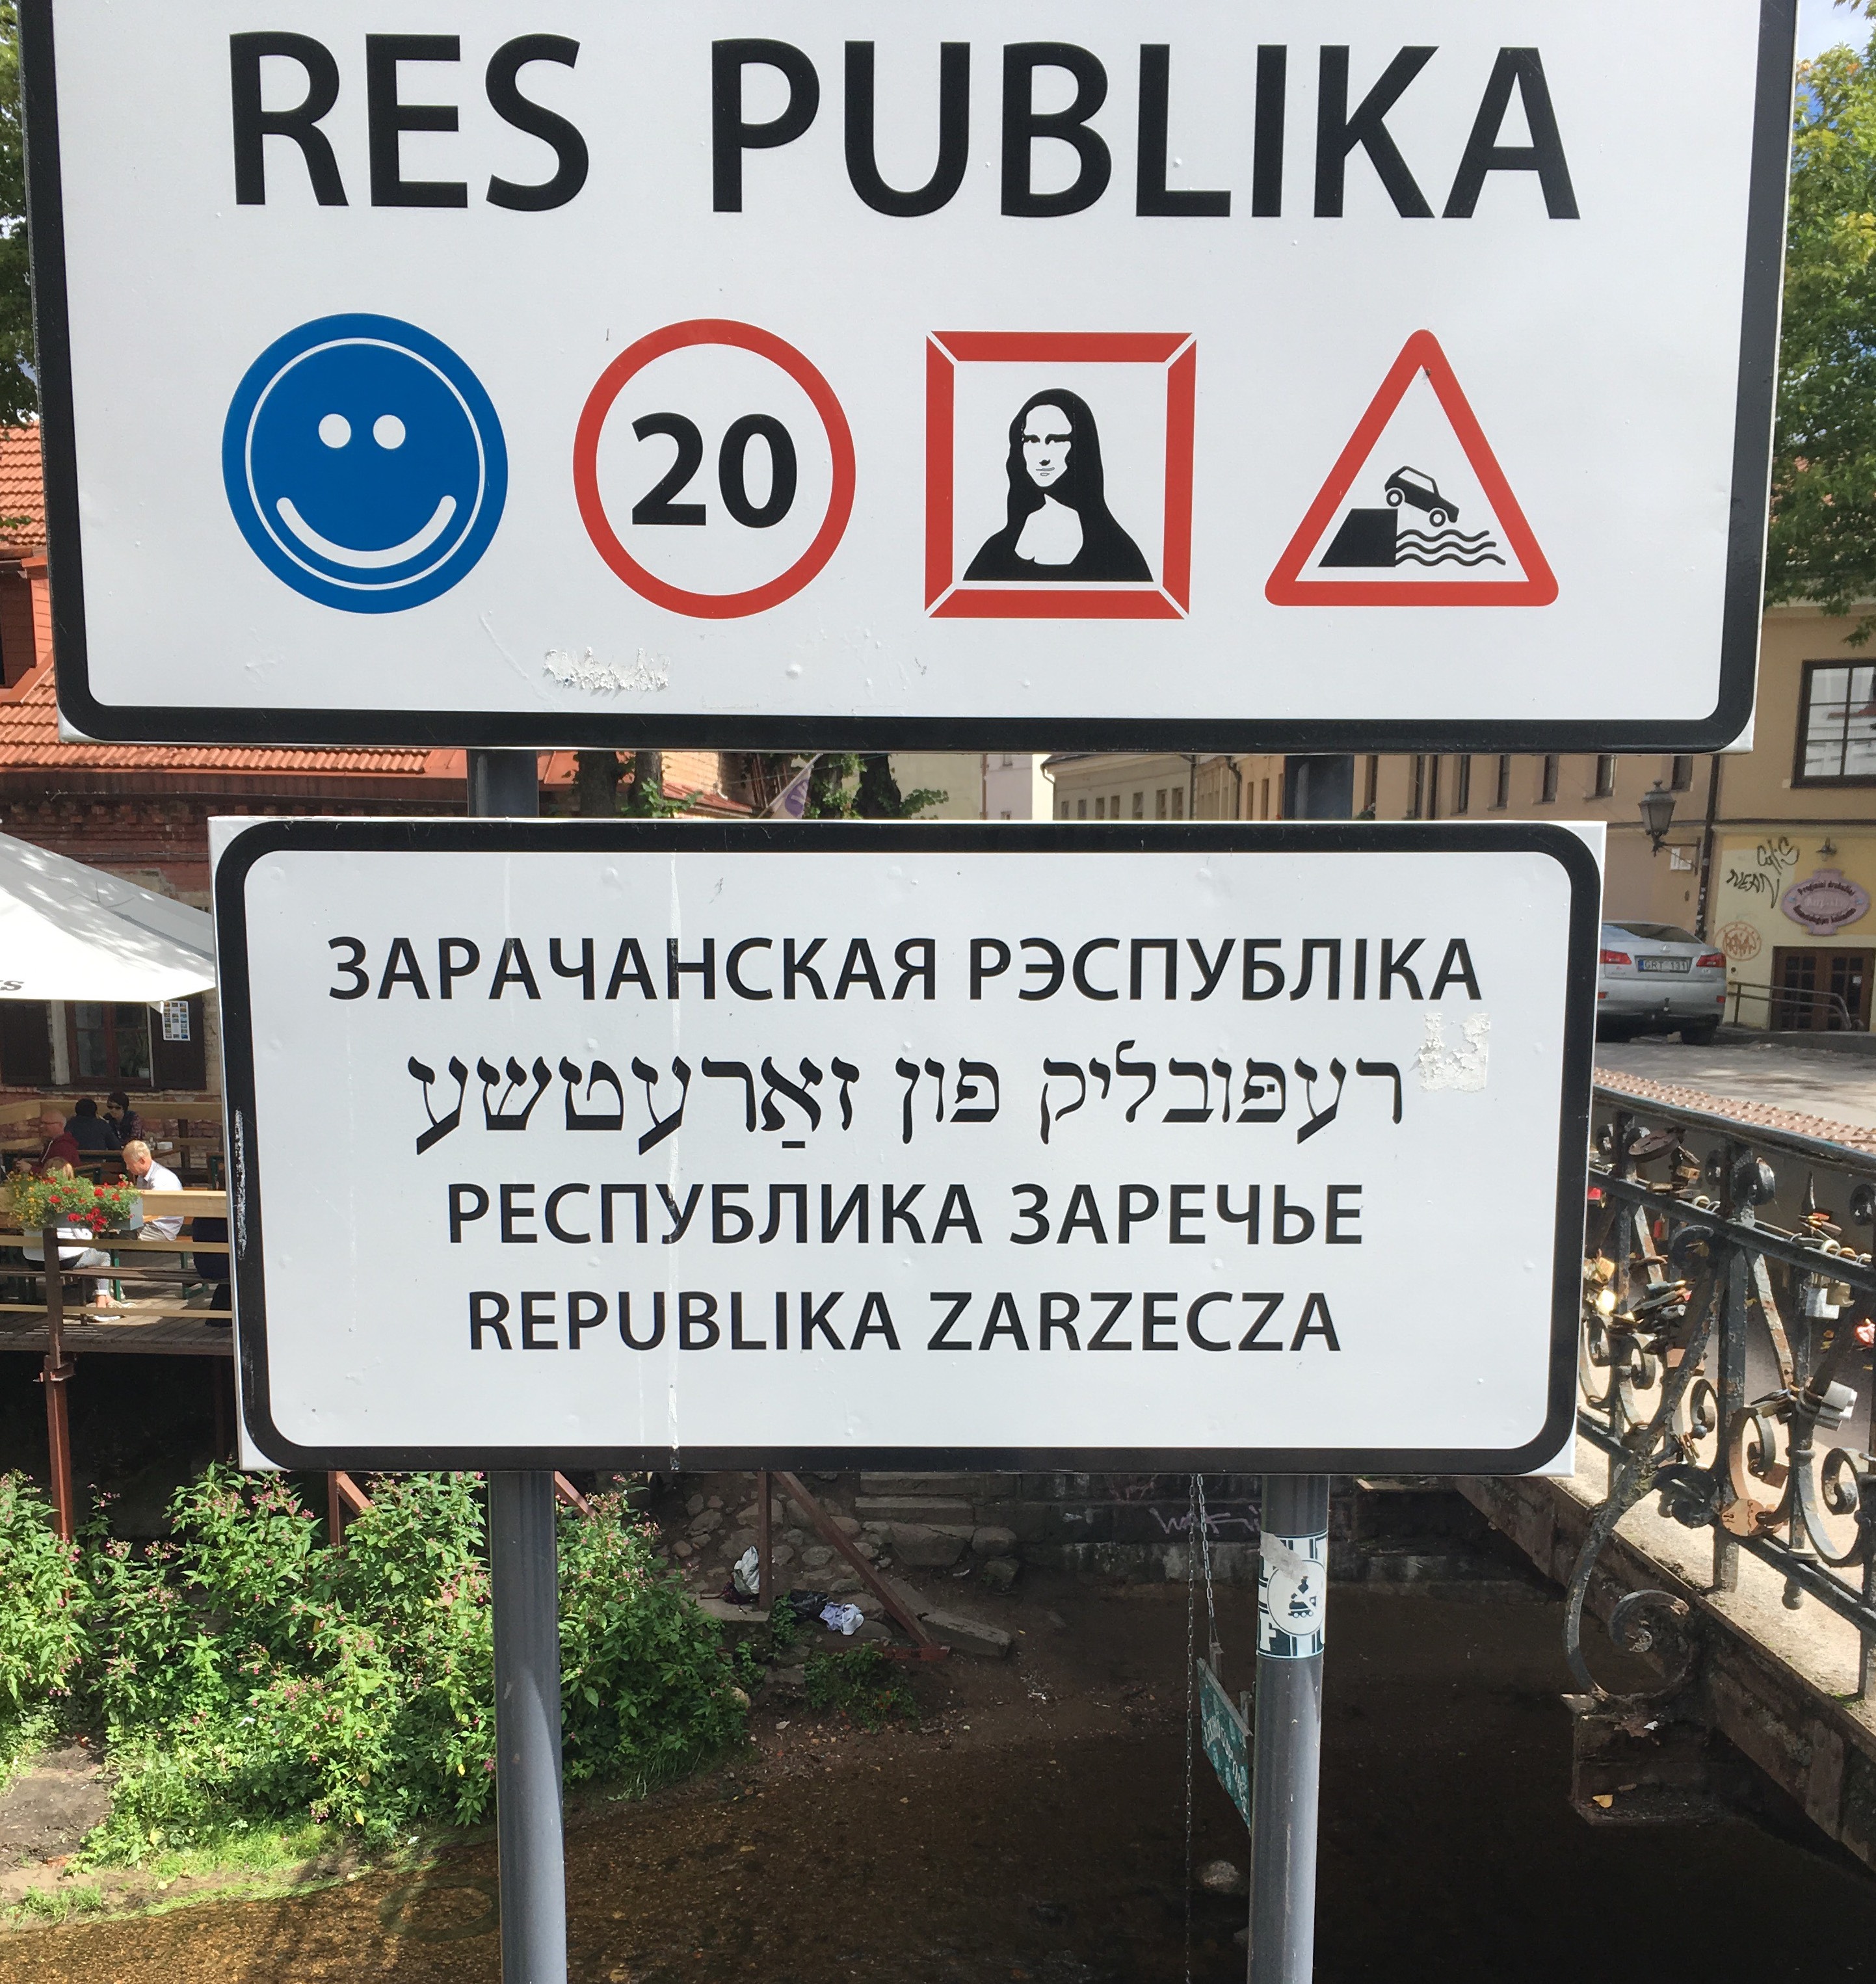 Photo of two street signs in Vilnius, one reading Res Publika and the other in Yiddish